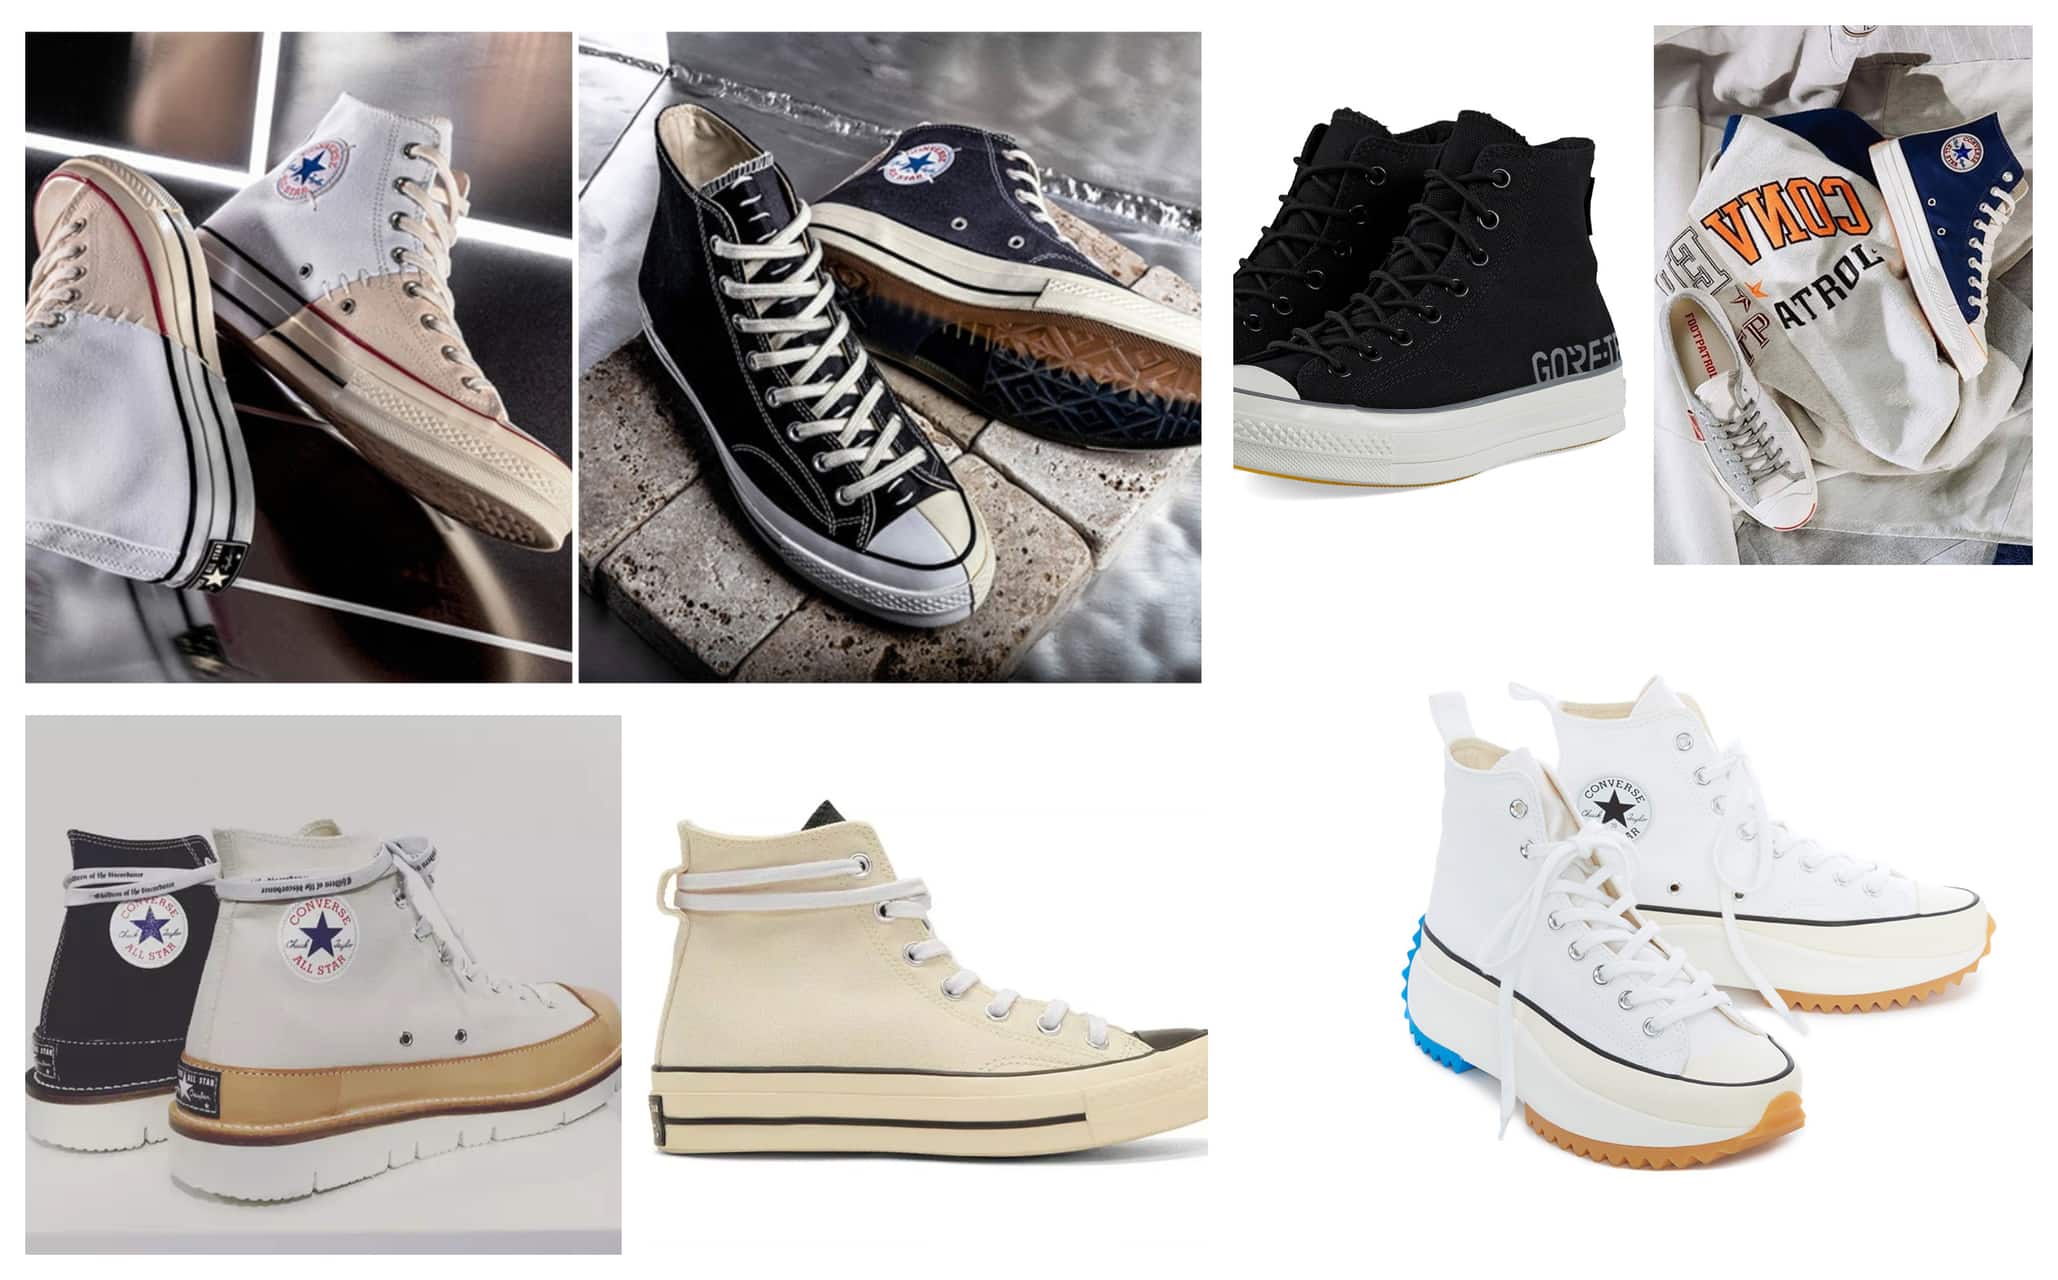 Top 10 best Converse shoes models from the beginning of 2019 to now